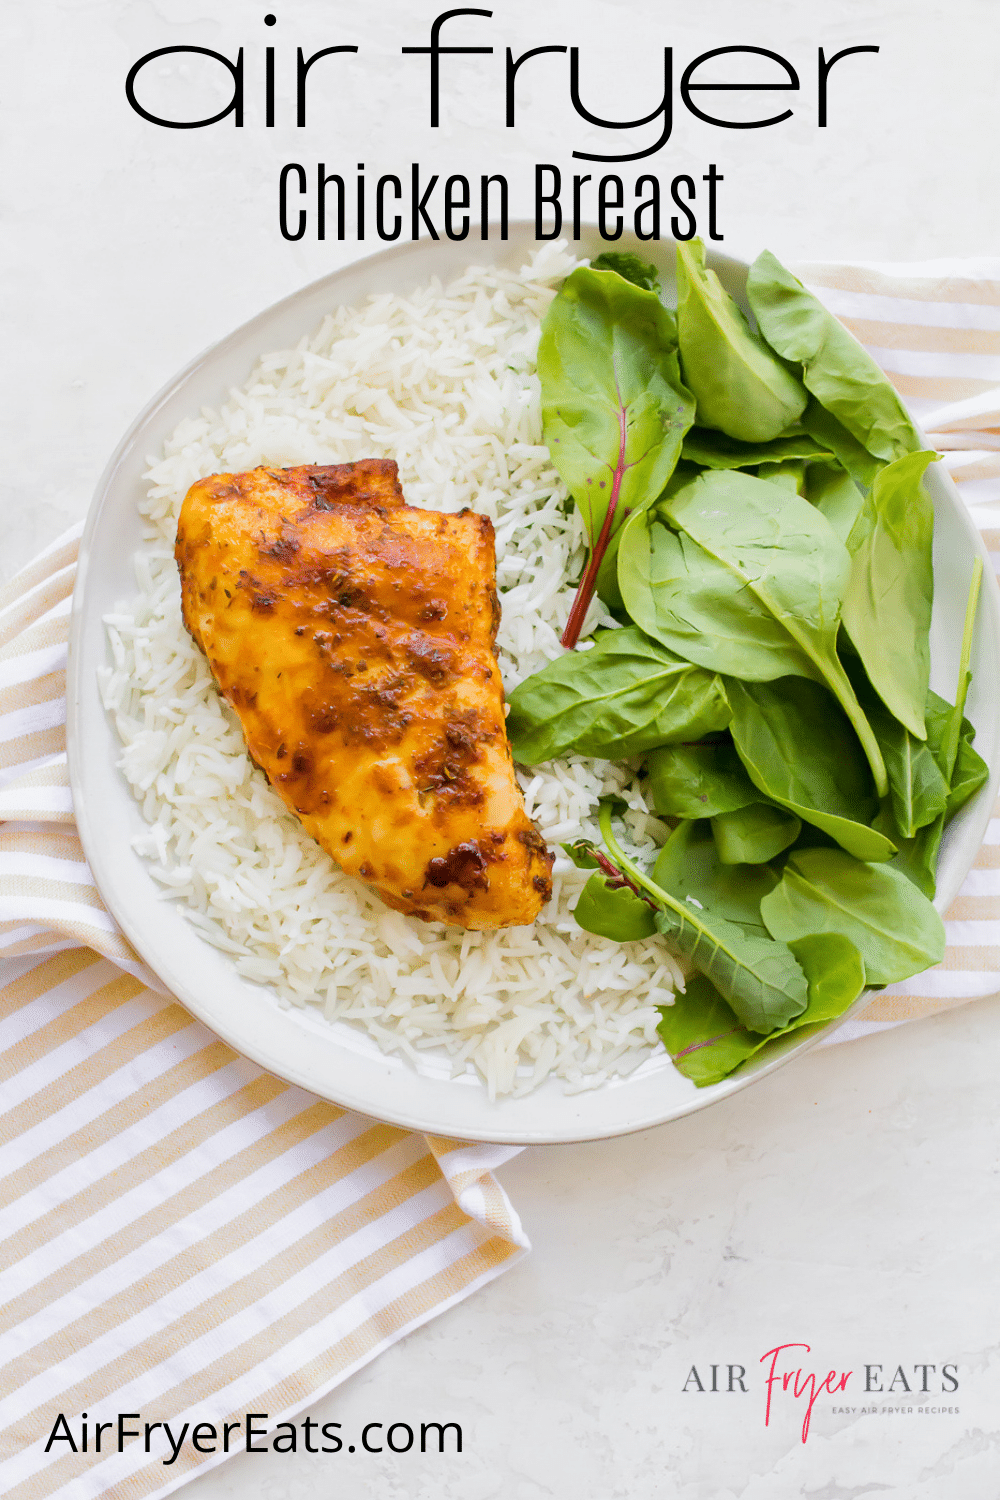 Air Fryer Chicken Breast is the fastest way to prepare incredible, juicy chicken breasts! Forget the oven - your air fryer will have this mouthwatering chicken cooked to perfection in only 20 minutes! #chickenbreast #airfryer #airfriedchicken #chickenrecipes via @vegetarianmamma